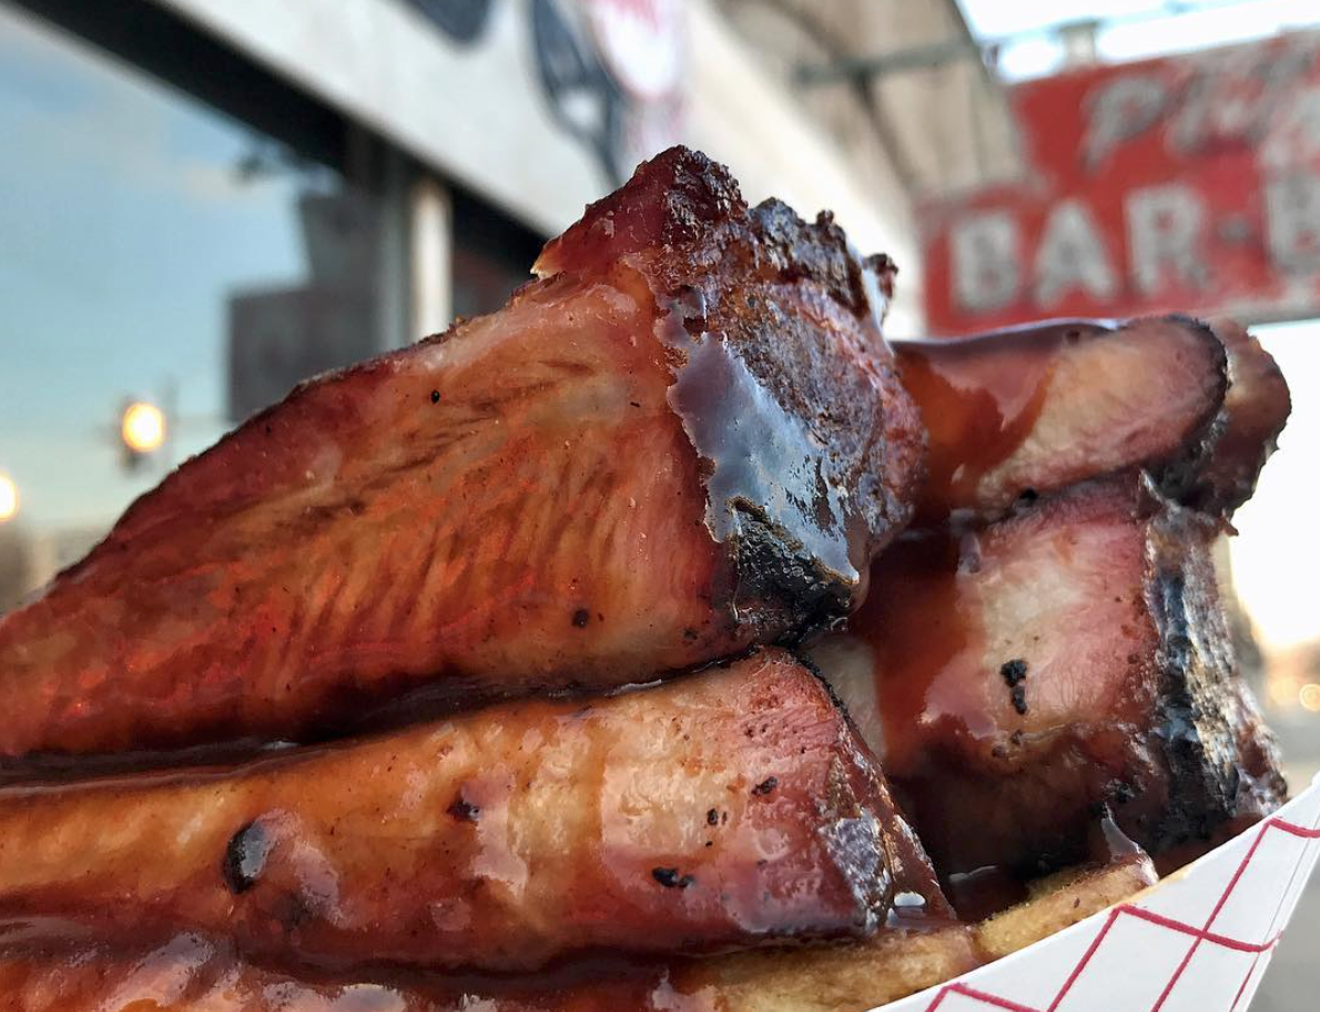 BBQ Supply Co. got its start in Chicago before coming to Denver.